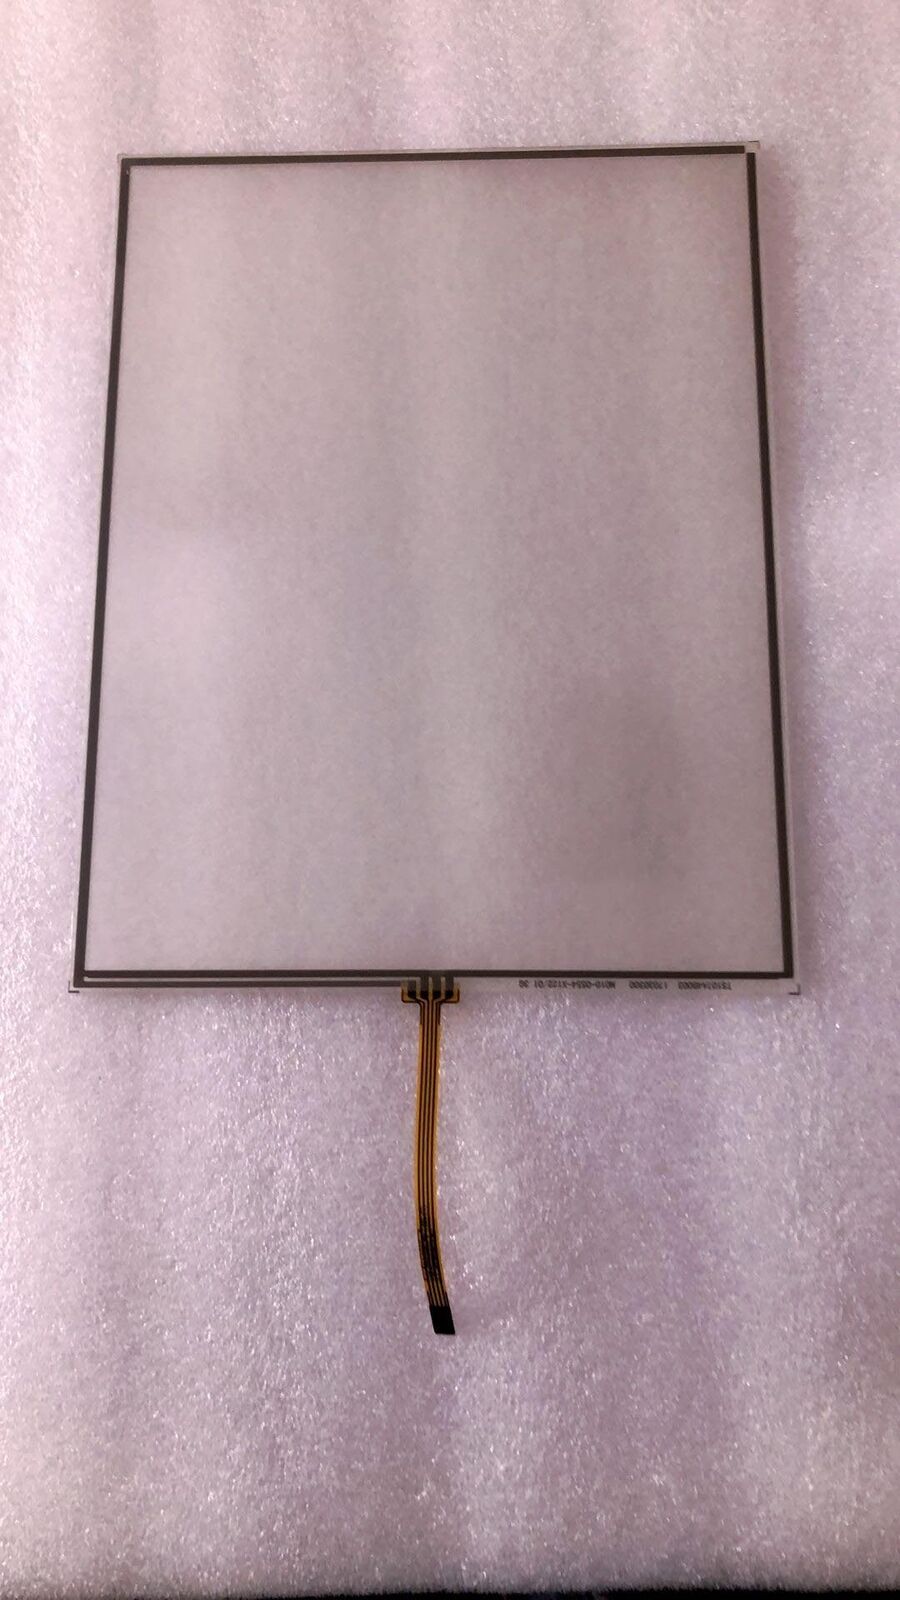 For AMT10422 touch screen glass panel